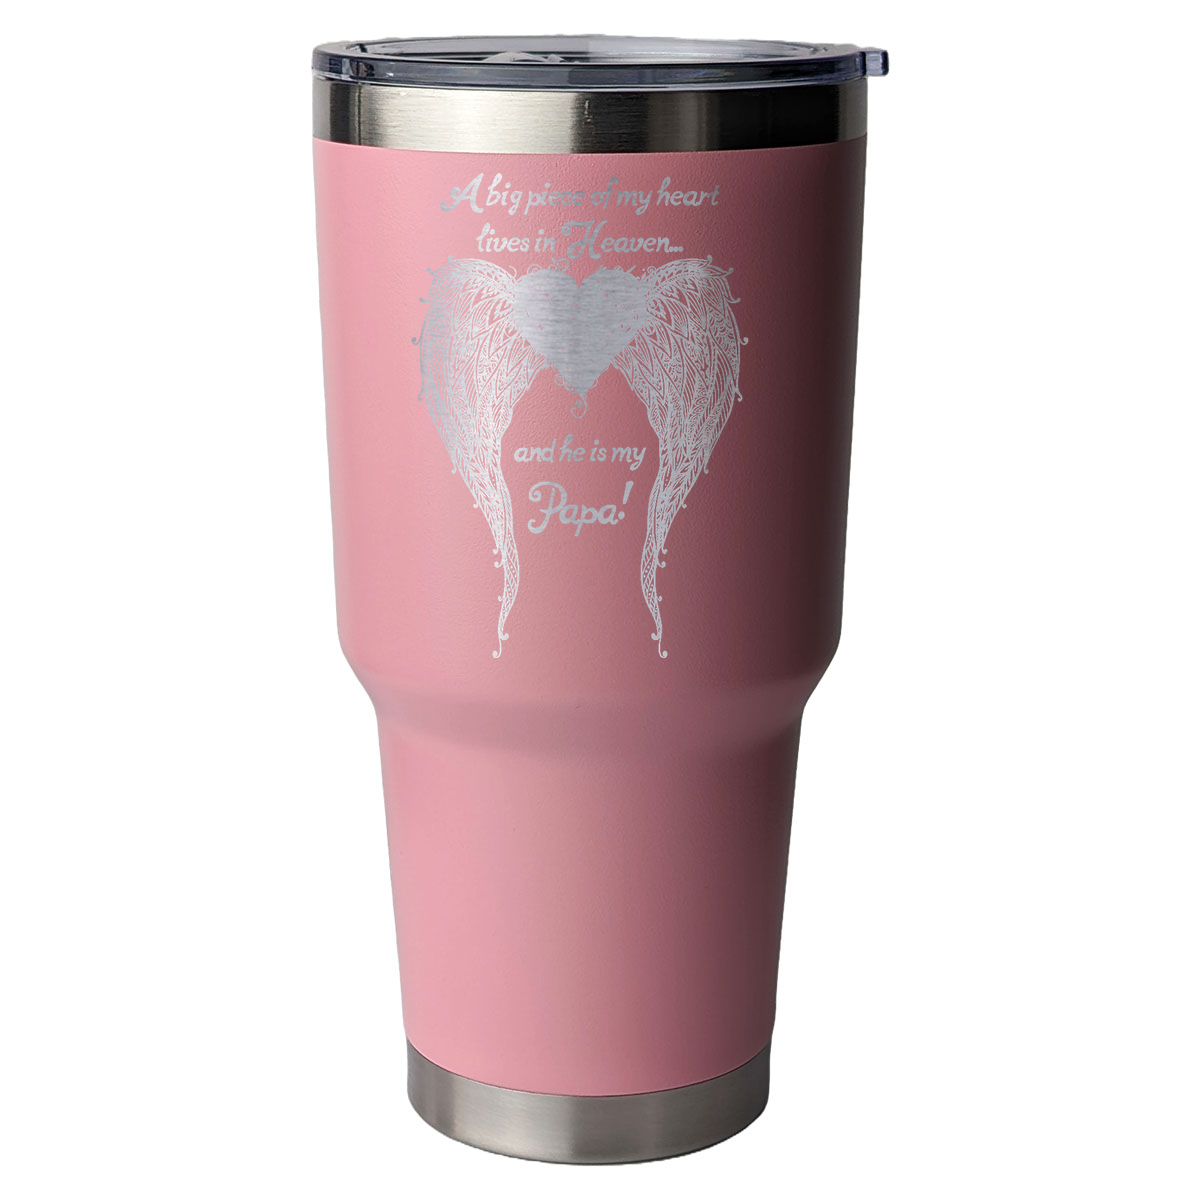 Papa - A Big Piece of my Heart 30 Ounce Laser Etched Tumbler Light Pink